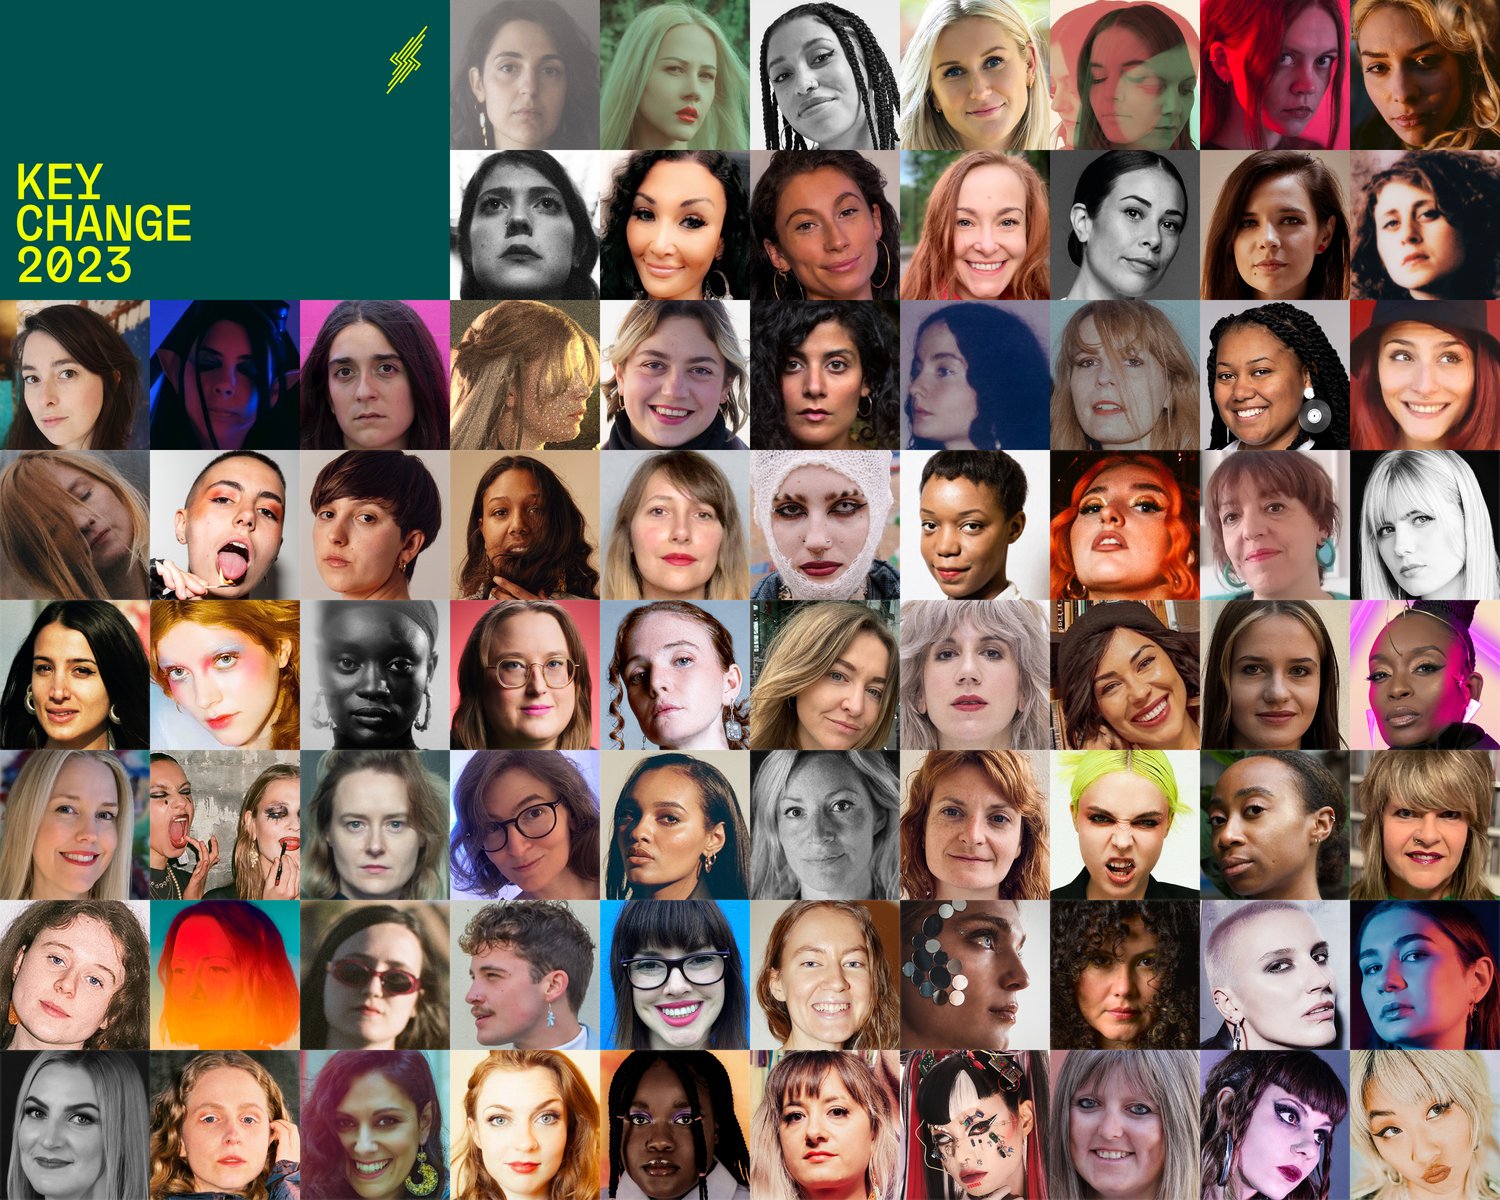 The global movement for equality in the music industry continues this year with 74 new faces in Keychange 2023 program